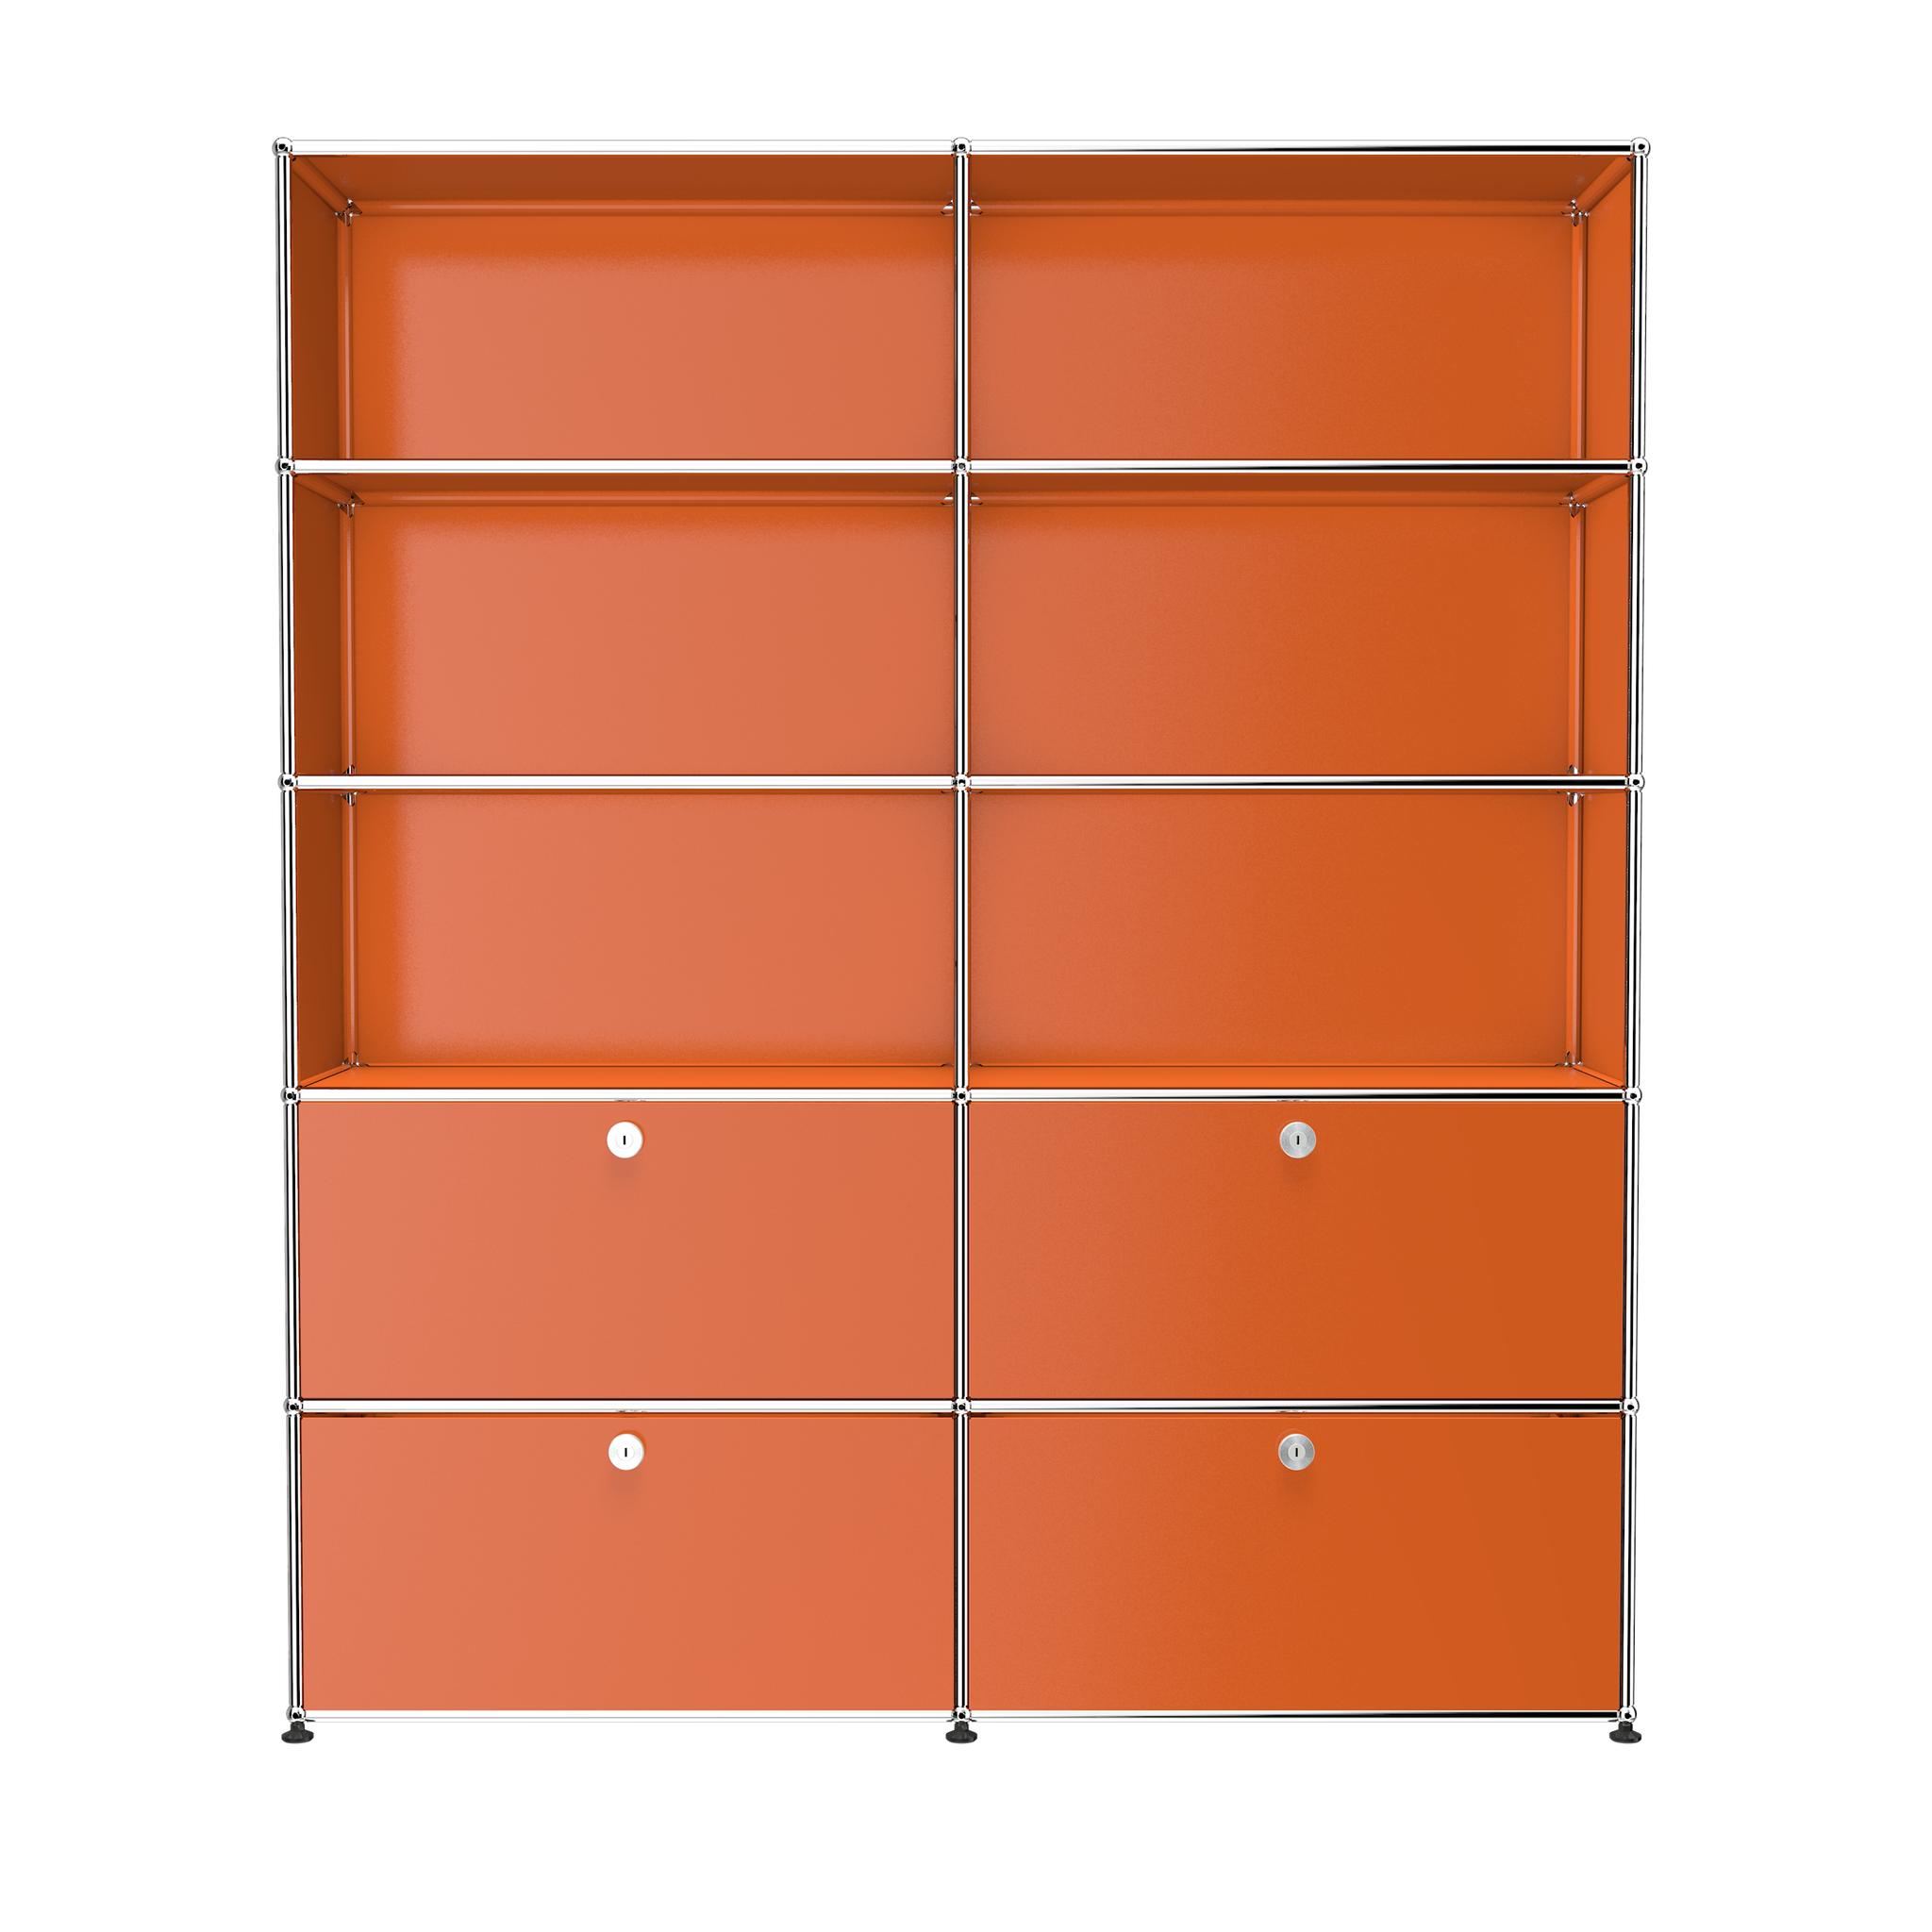 USM Haller Large Contemporary Shelving with Storage (R2) in Pure Orange